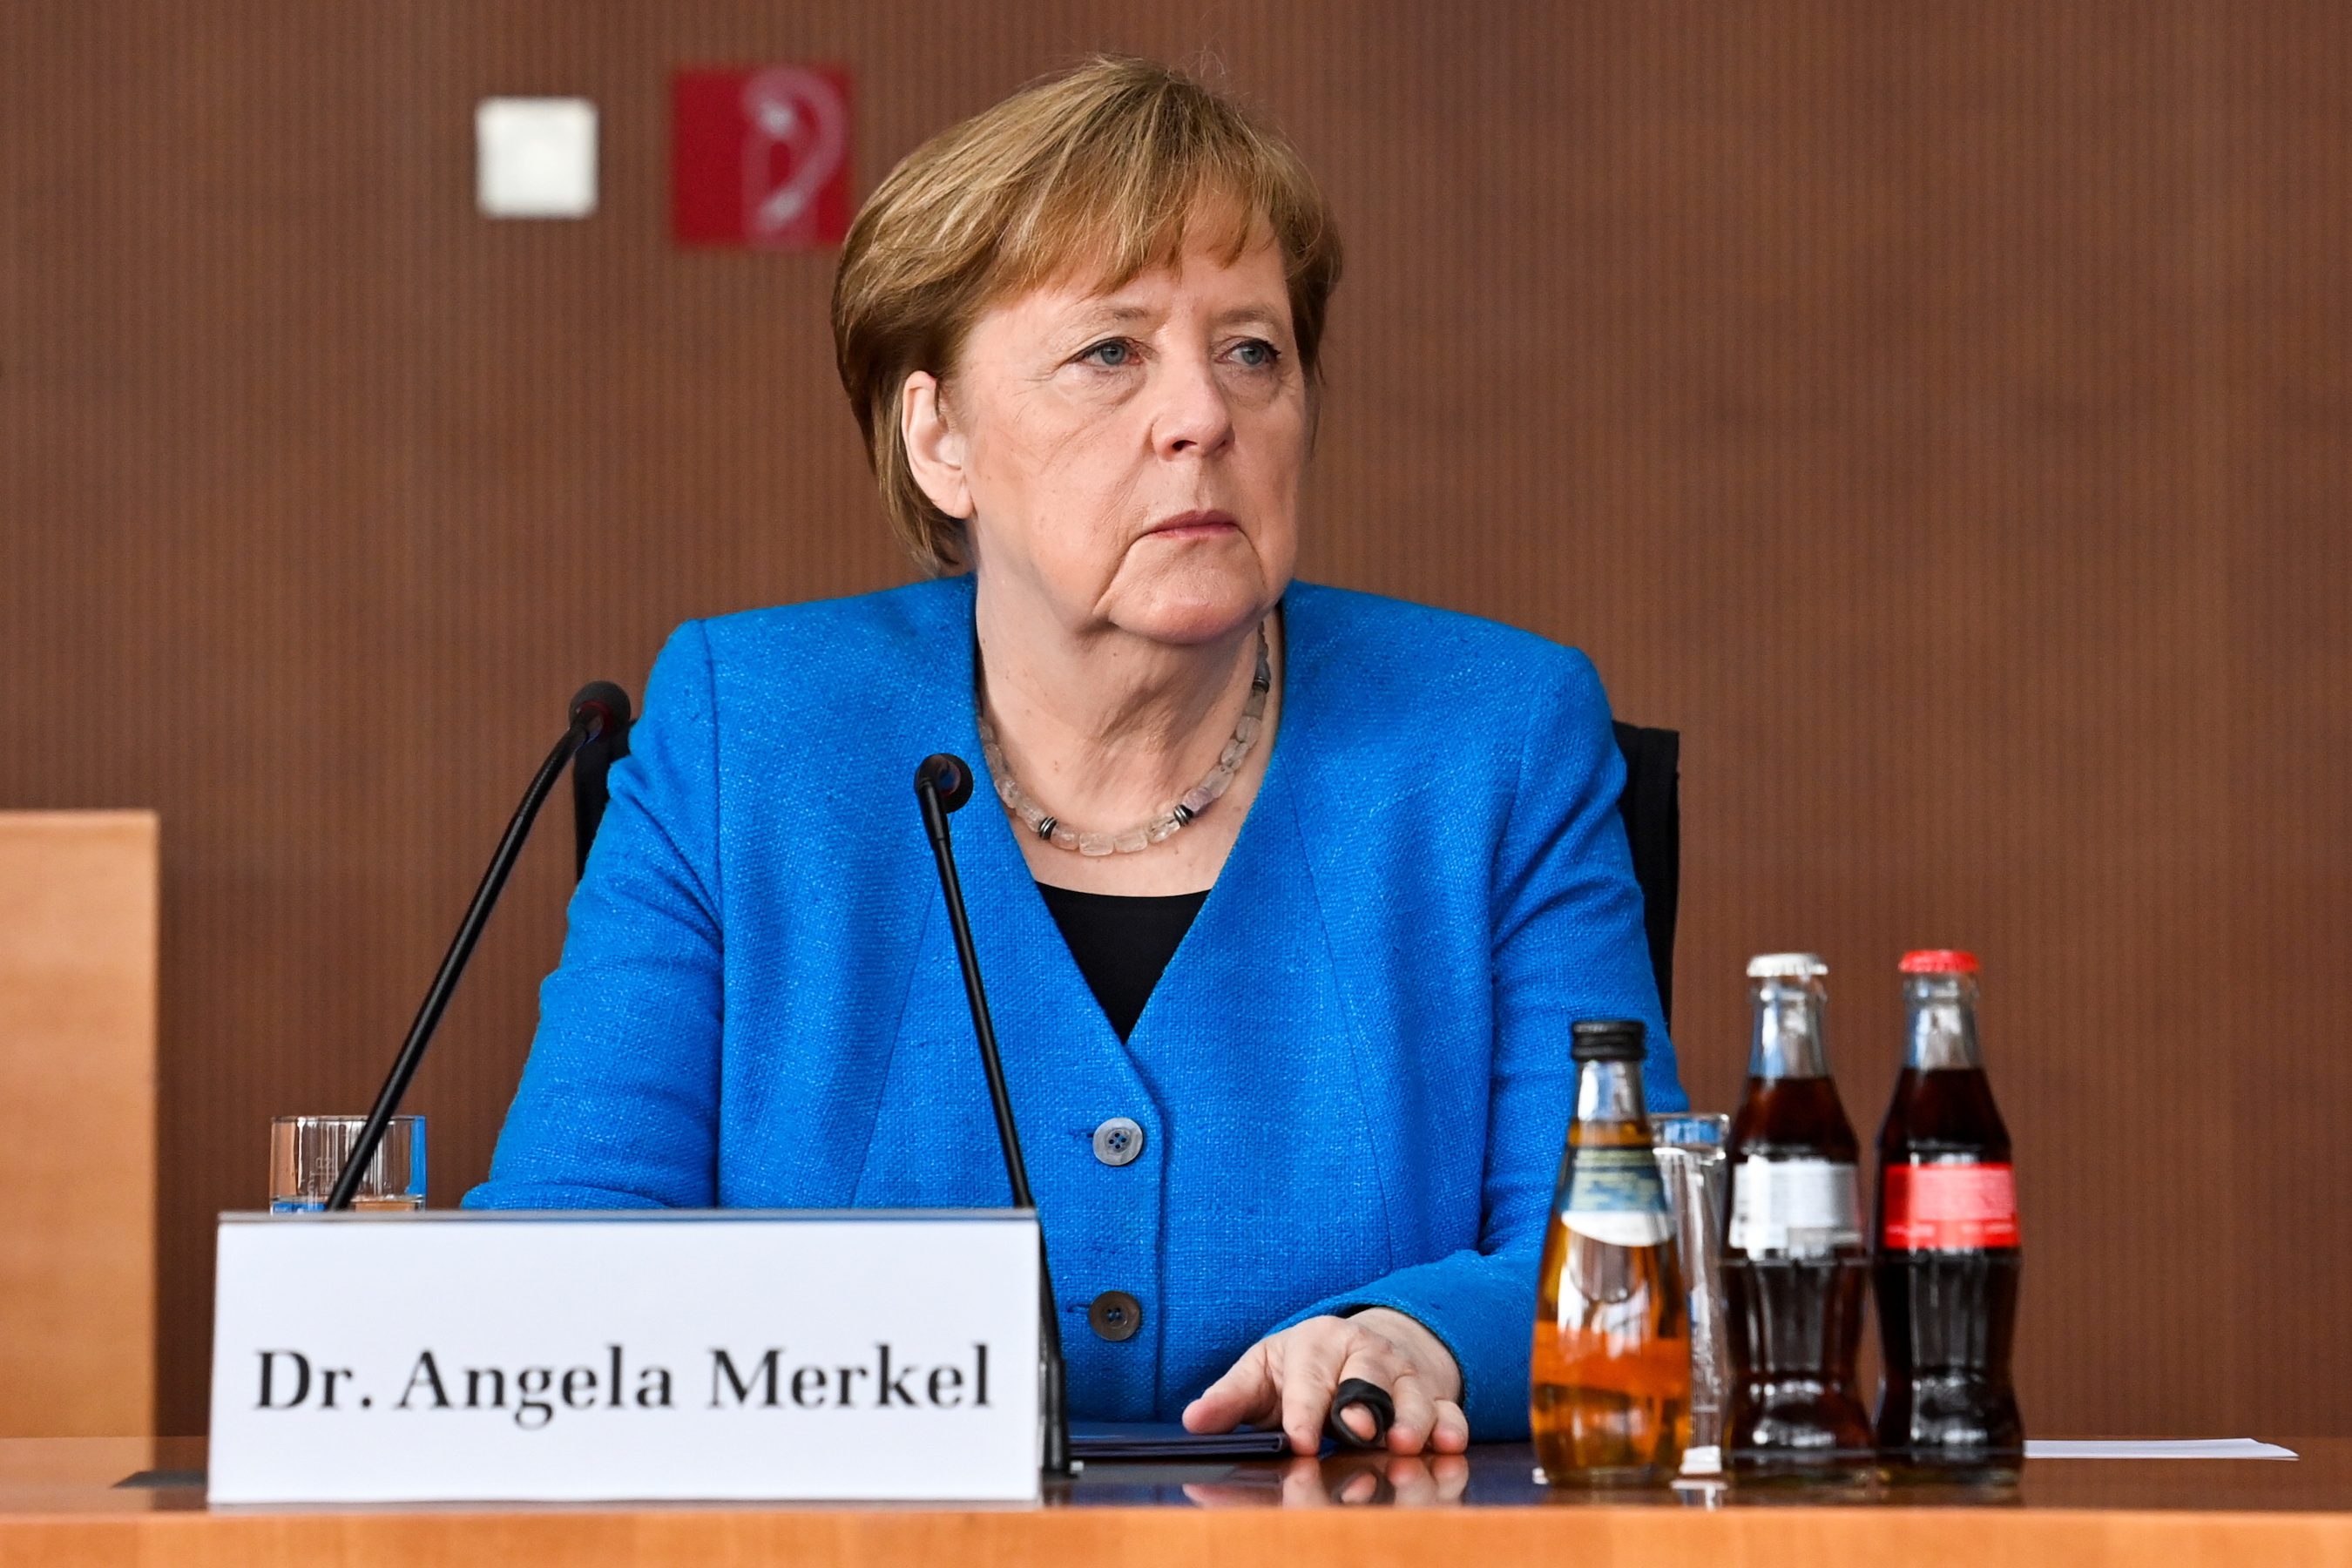 Germany’s Merkel rejects criticism of her Wirecard lobbying in China